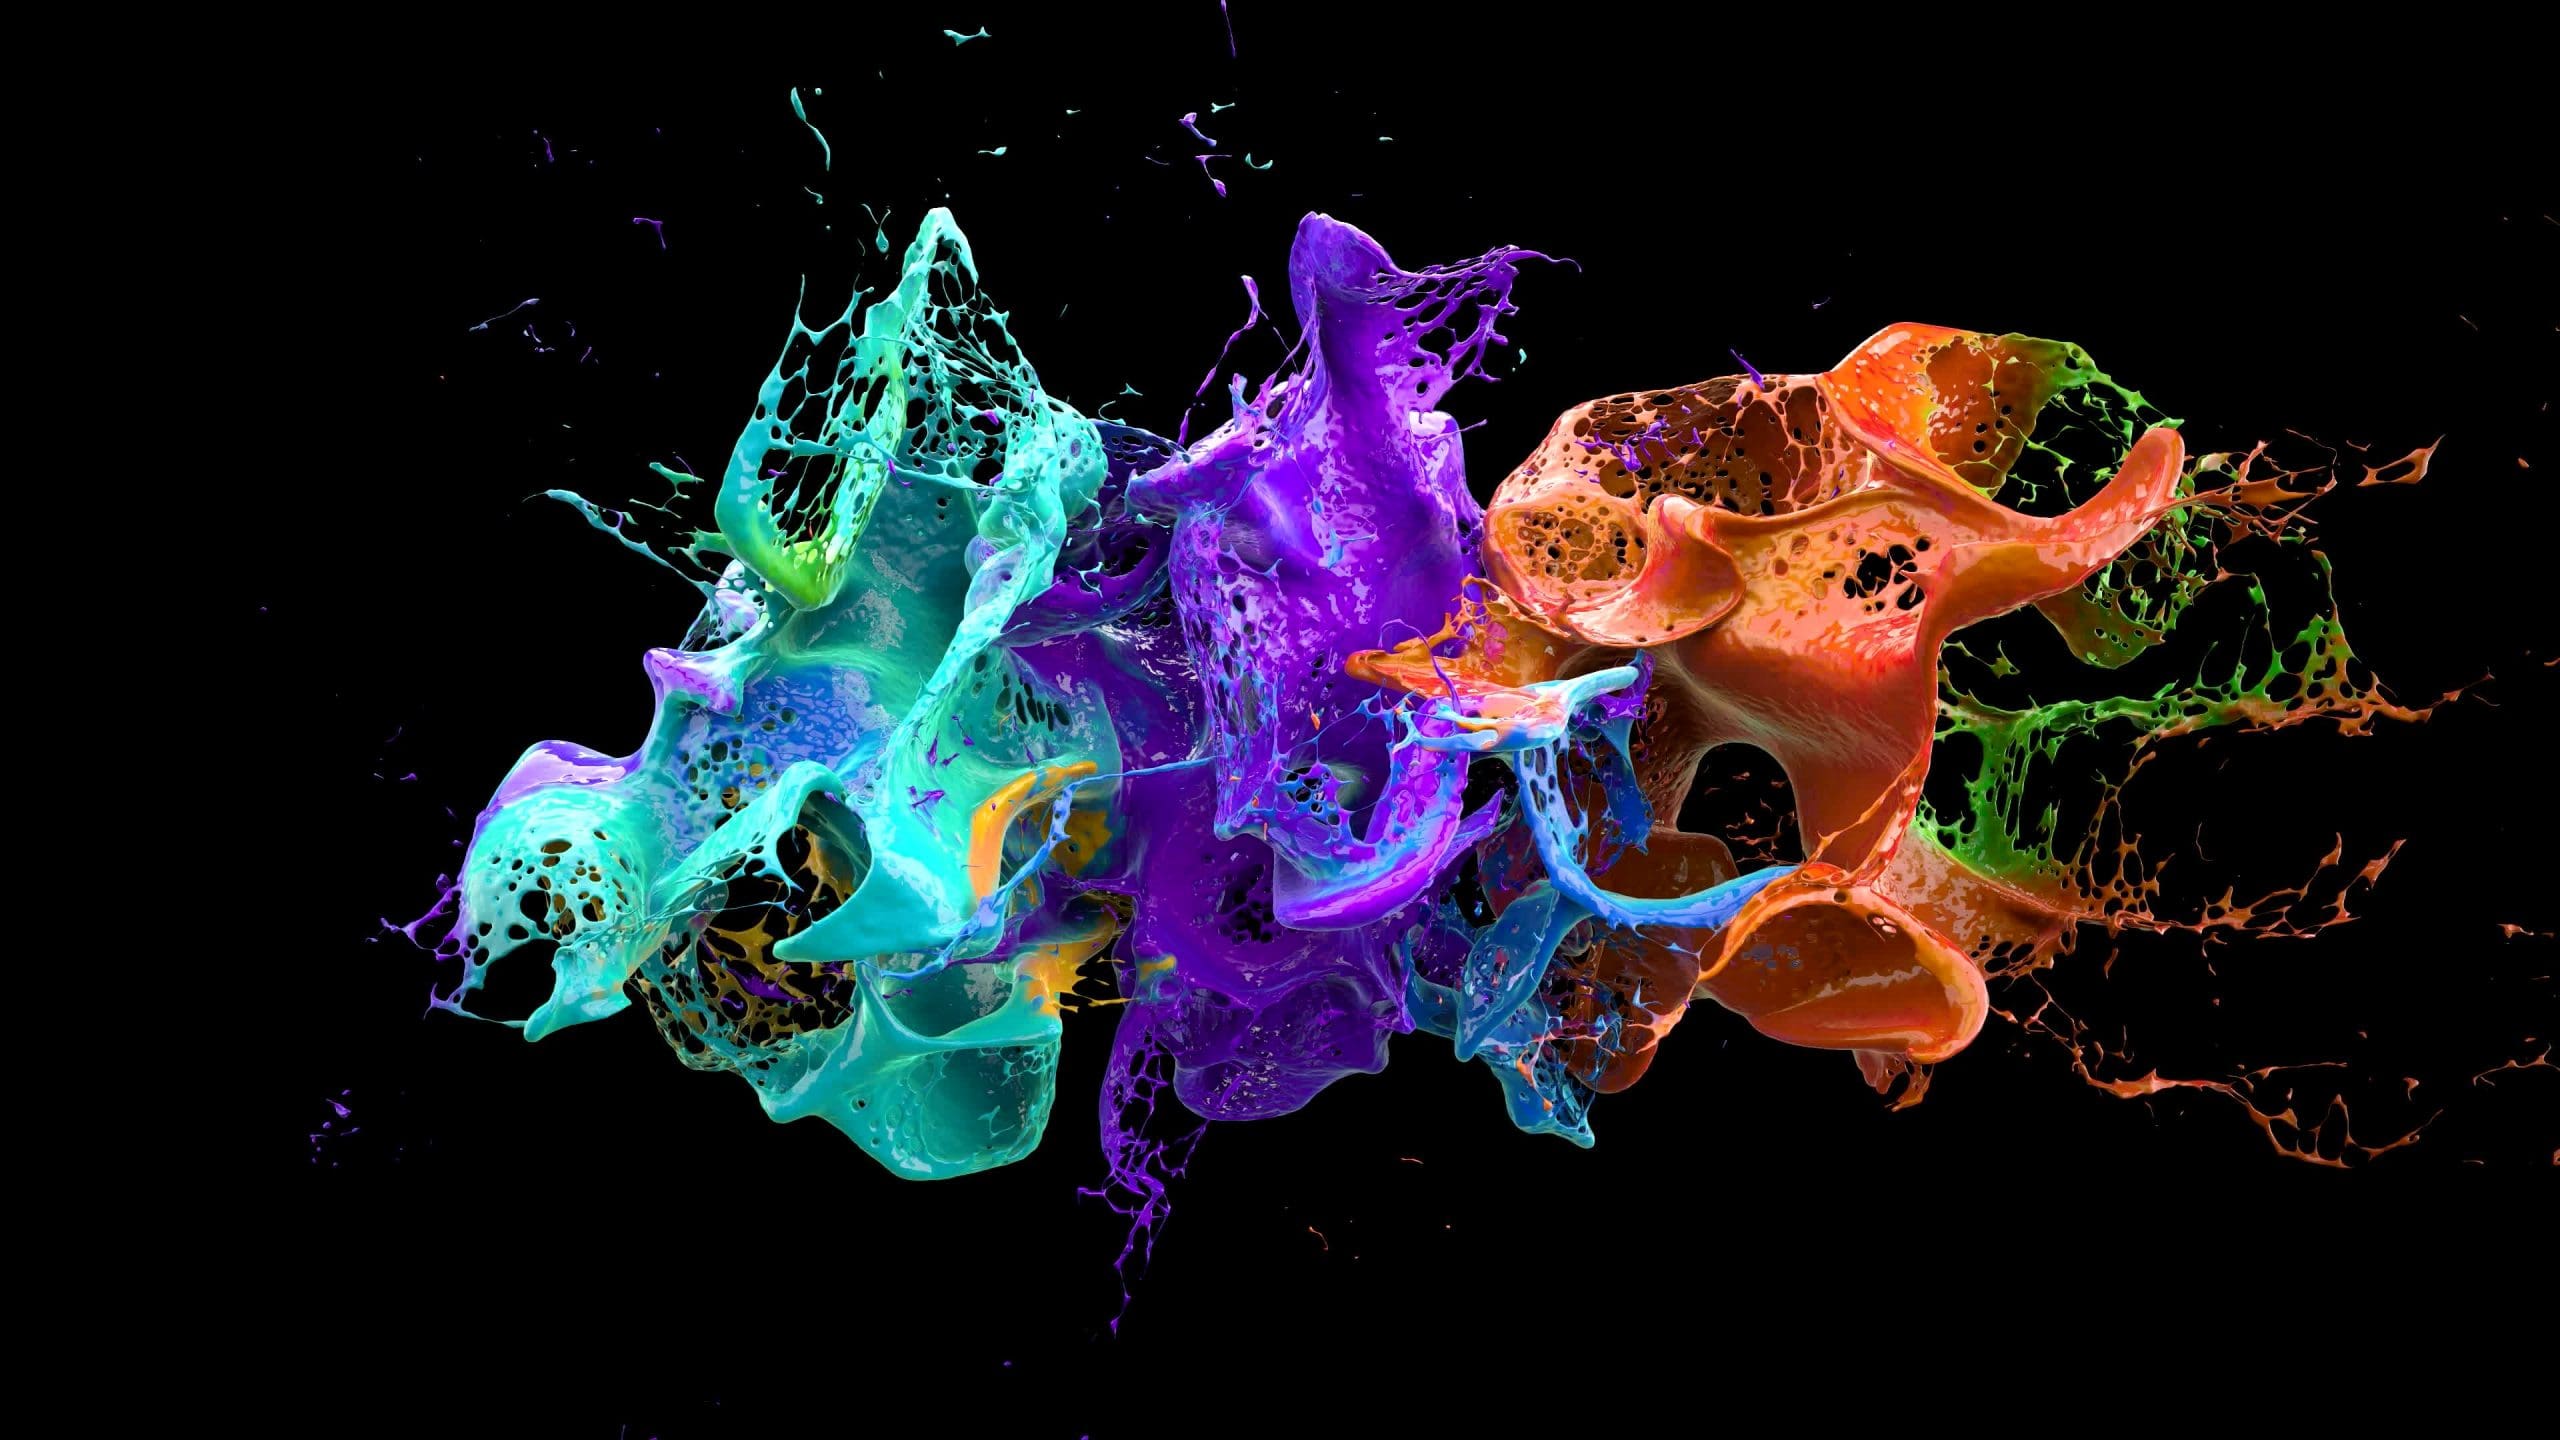 A colorful splash of liquid on a black background.